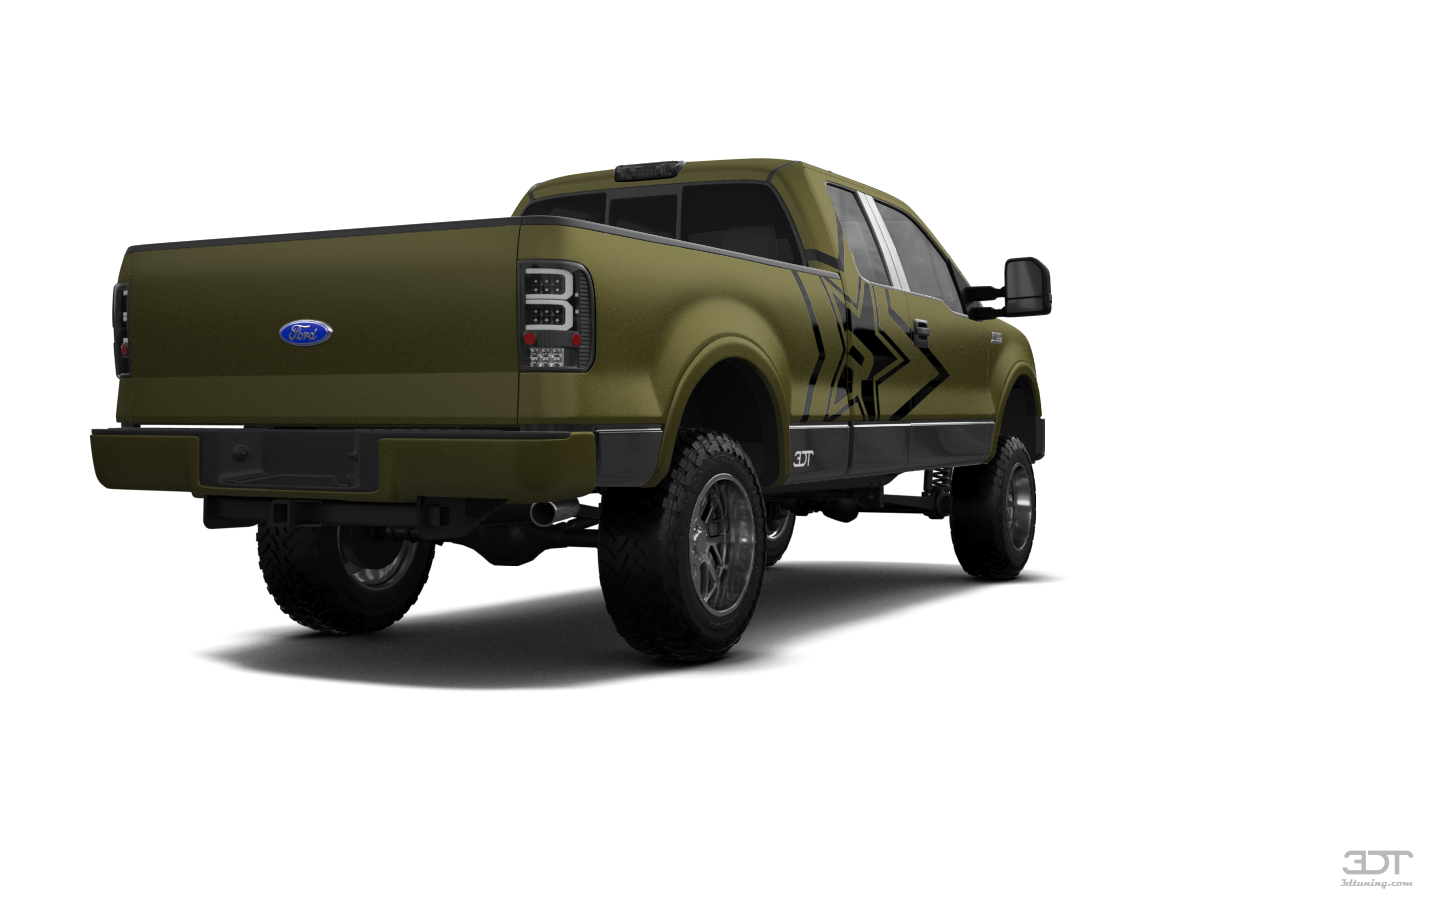 Ford F-150 SuperCab 4 Door pickup truck 2004 tuning